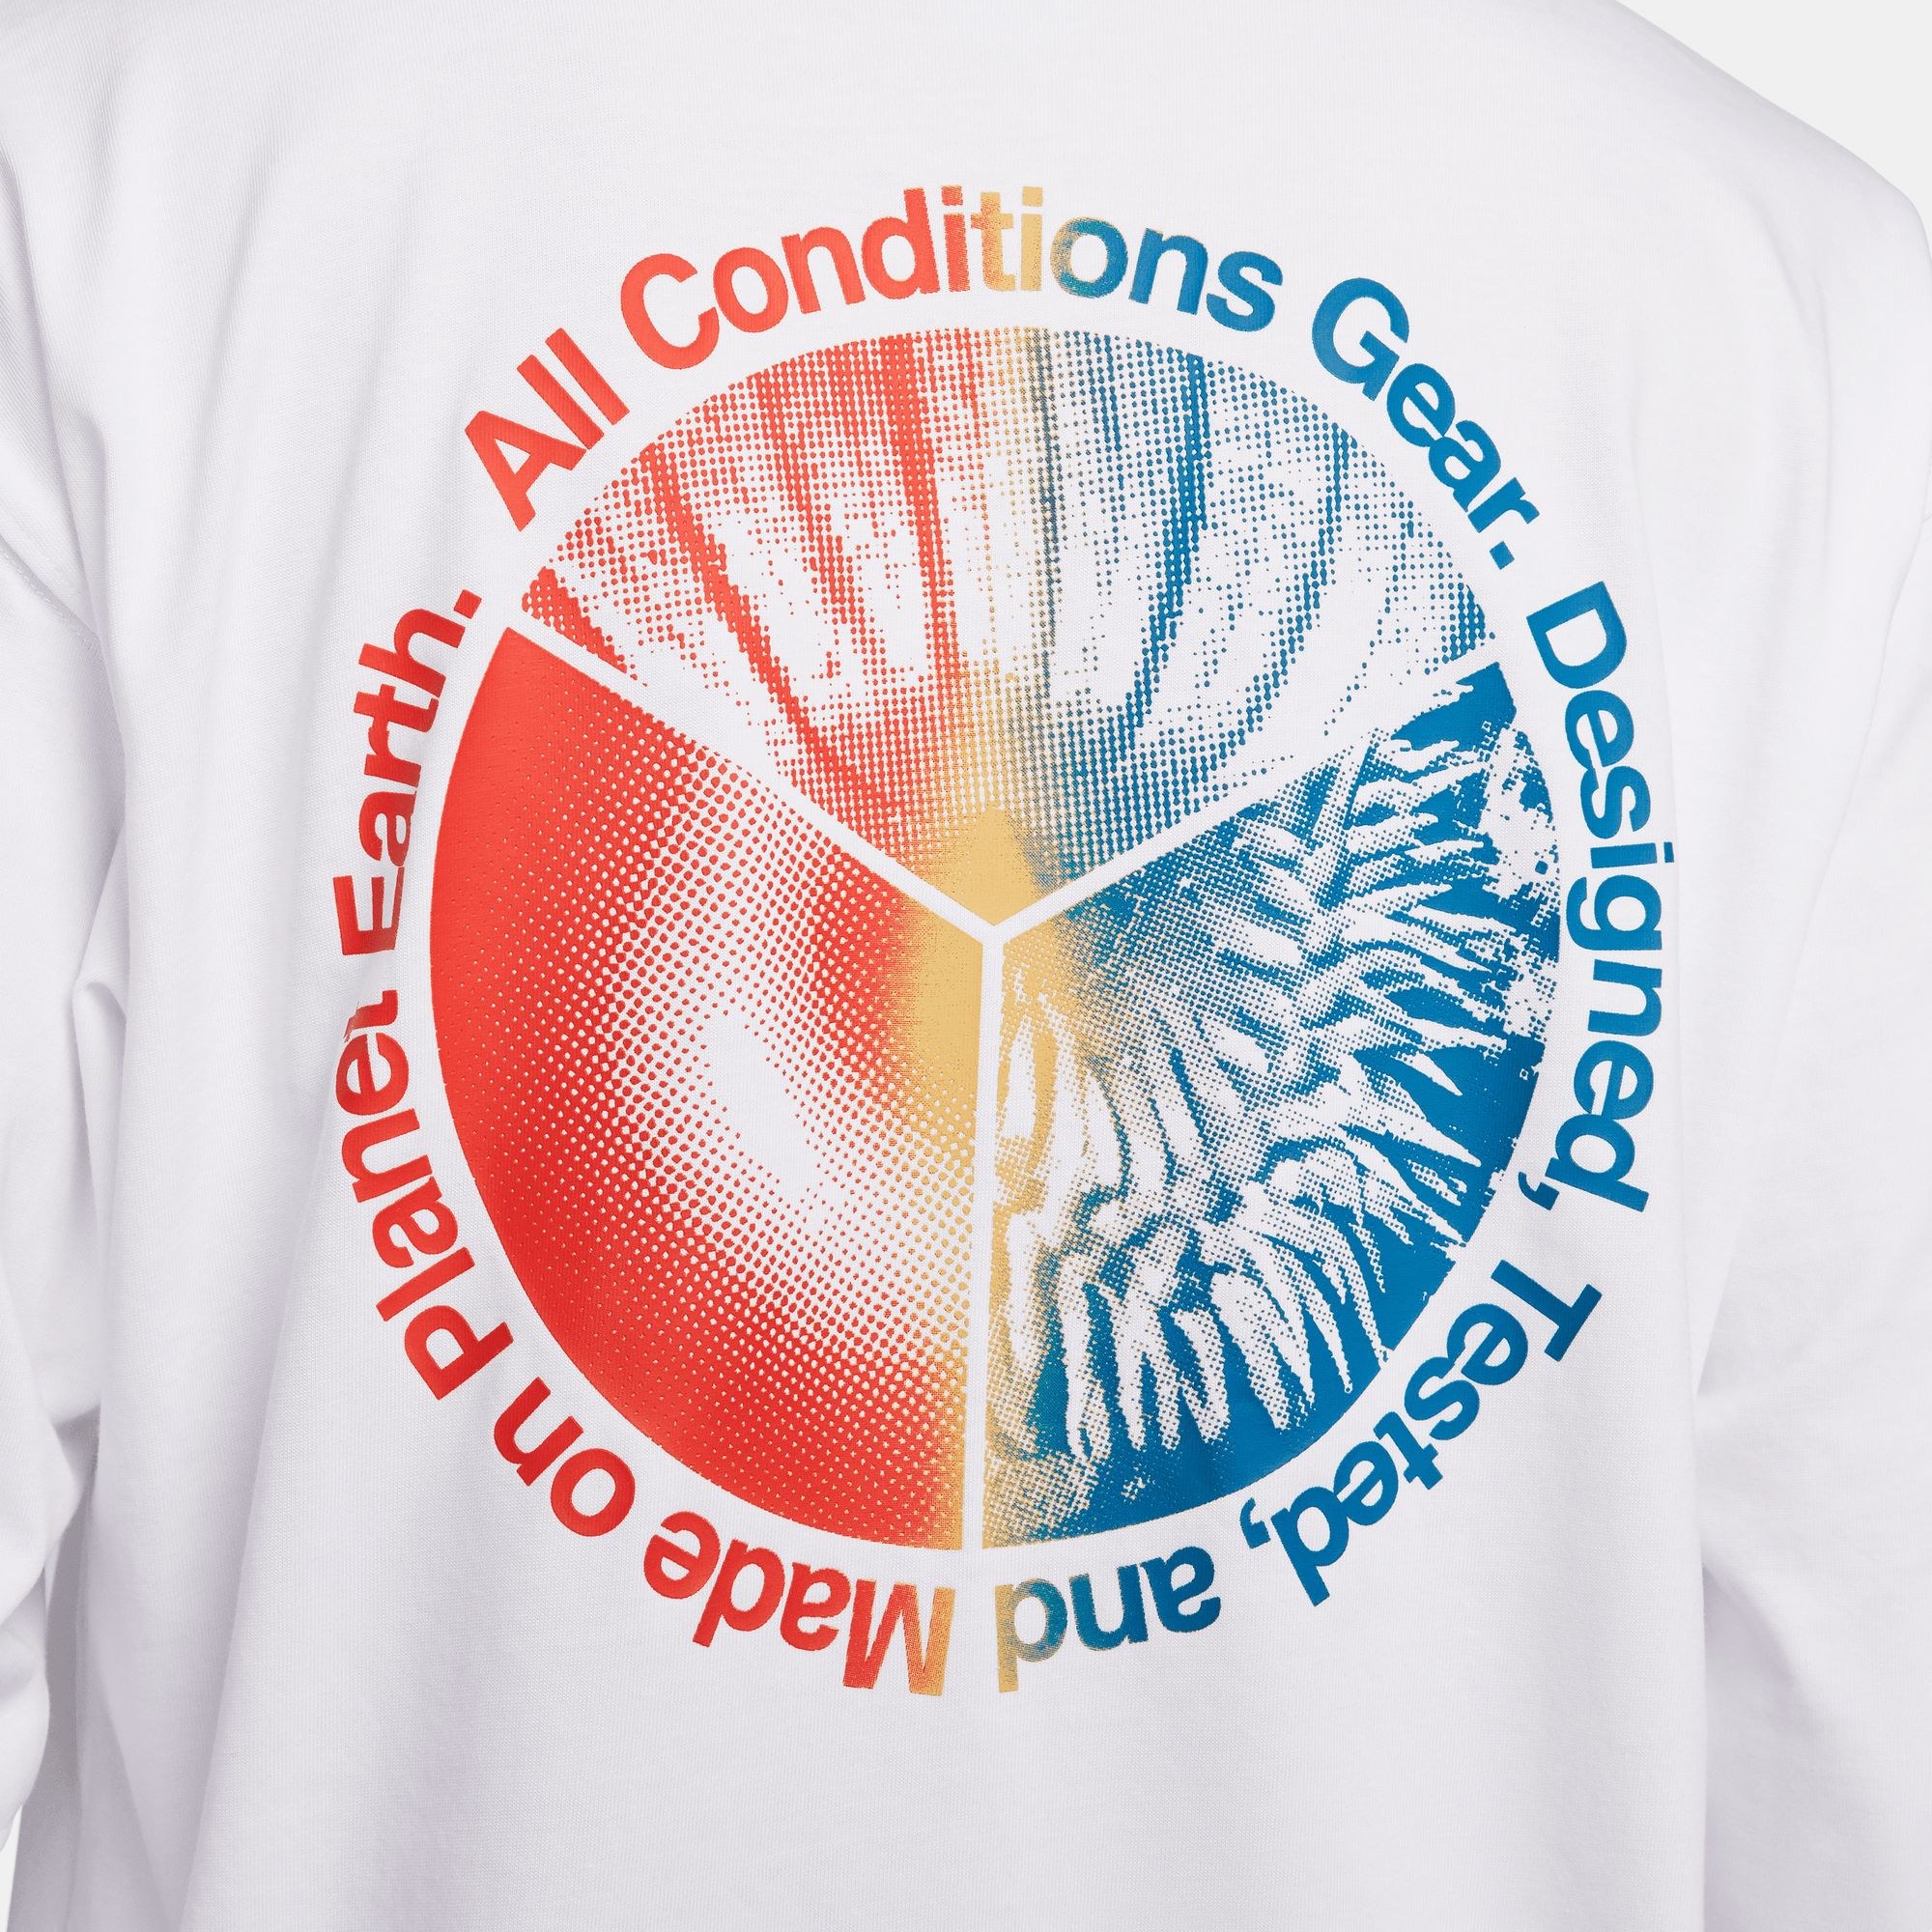 ACG L/S TEE - WHITE / RED / BLUE